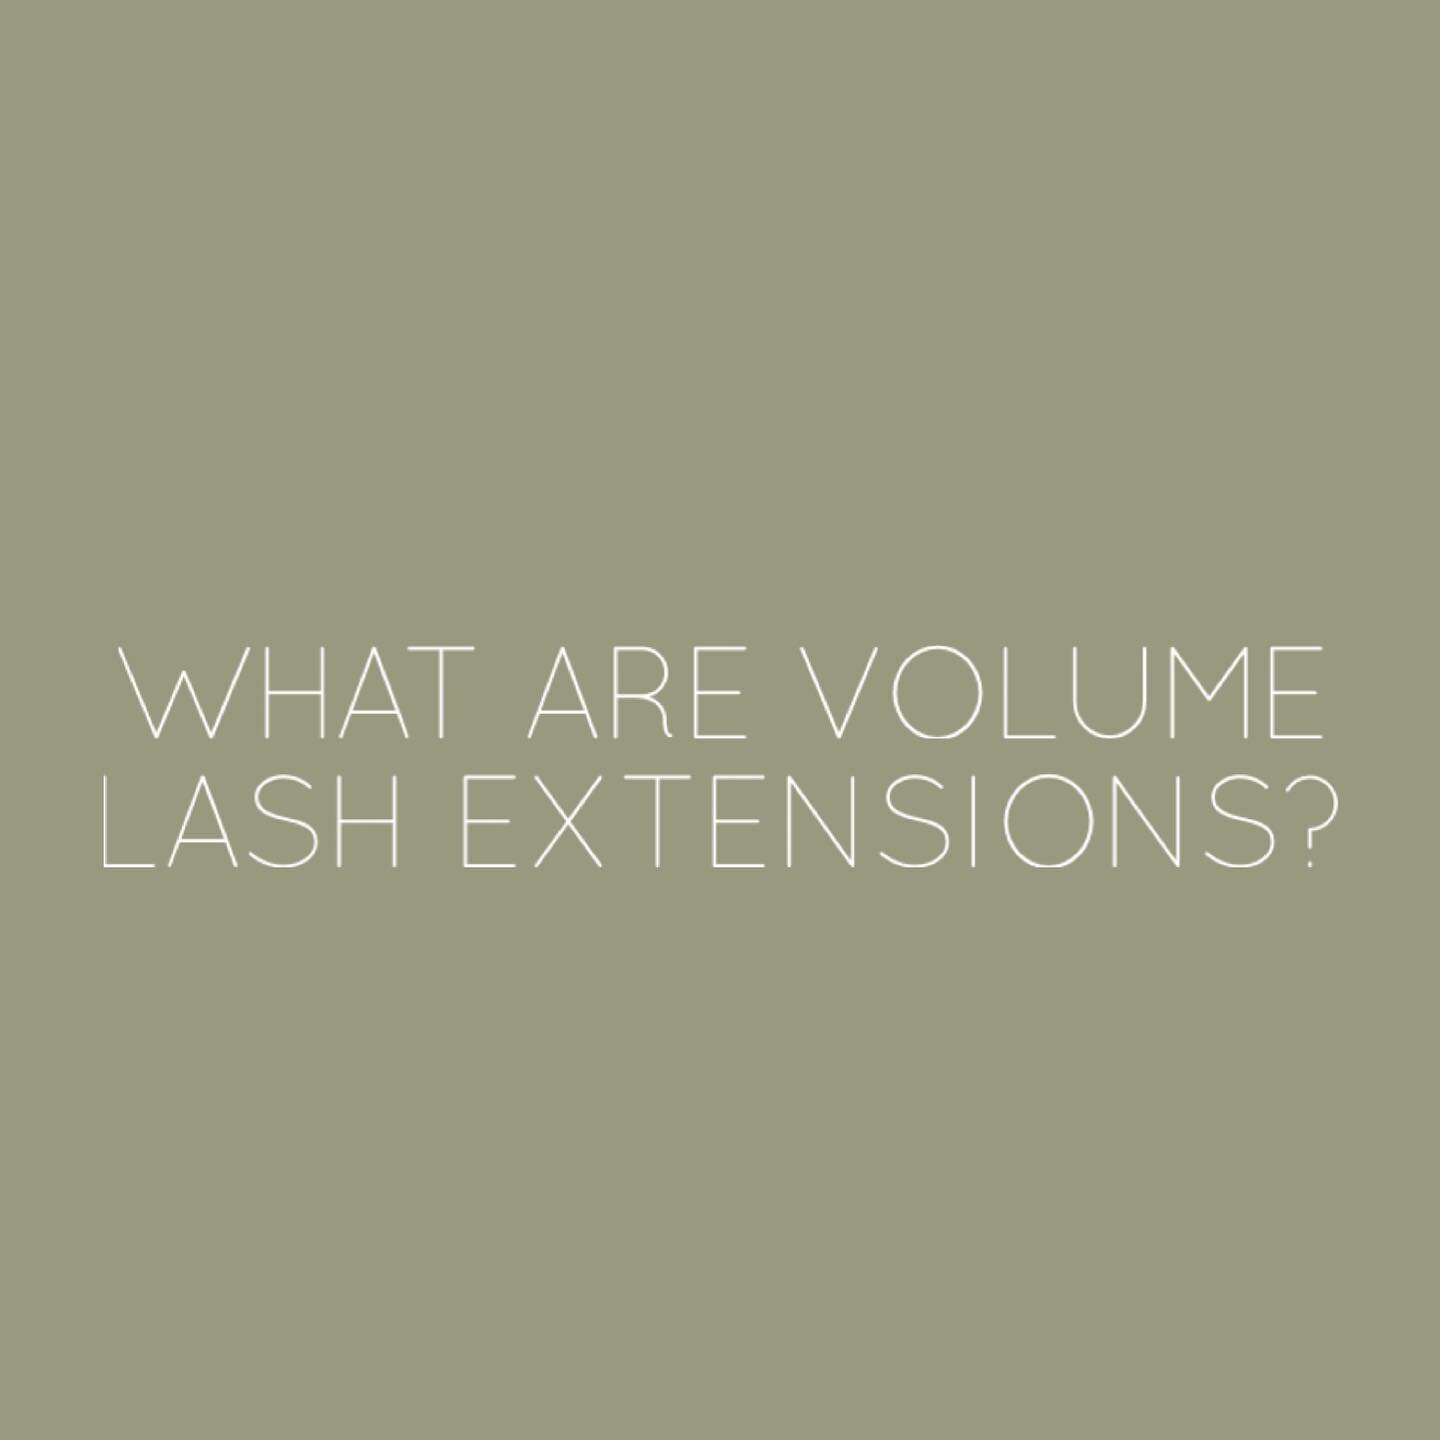 &bull;Volume Eyelash Extensions&bull;
✨3+ very fine light weight fibers bunched together and fanned out on one single natural lash 💐 
✨can create a dark lash line for drama
✨can be kept light weight and natural for fine natural lashes
✨most versatil